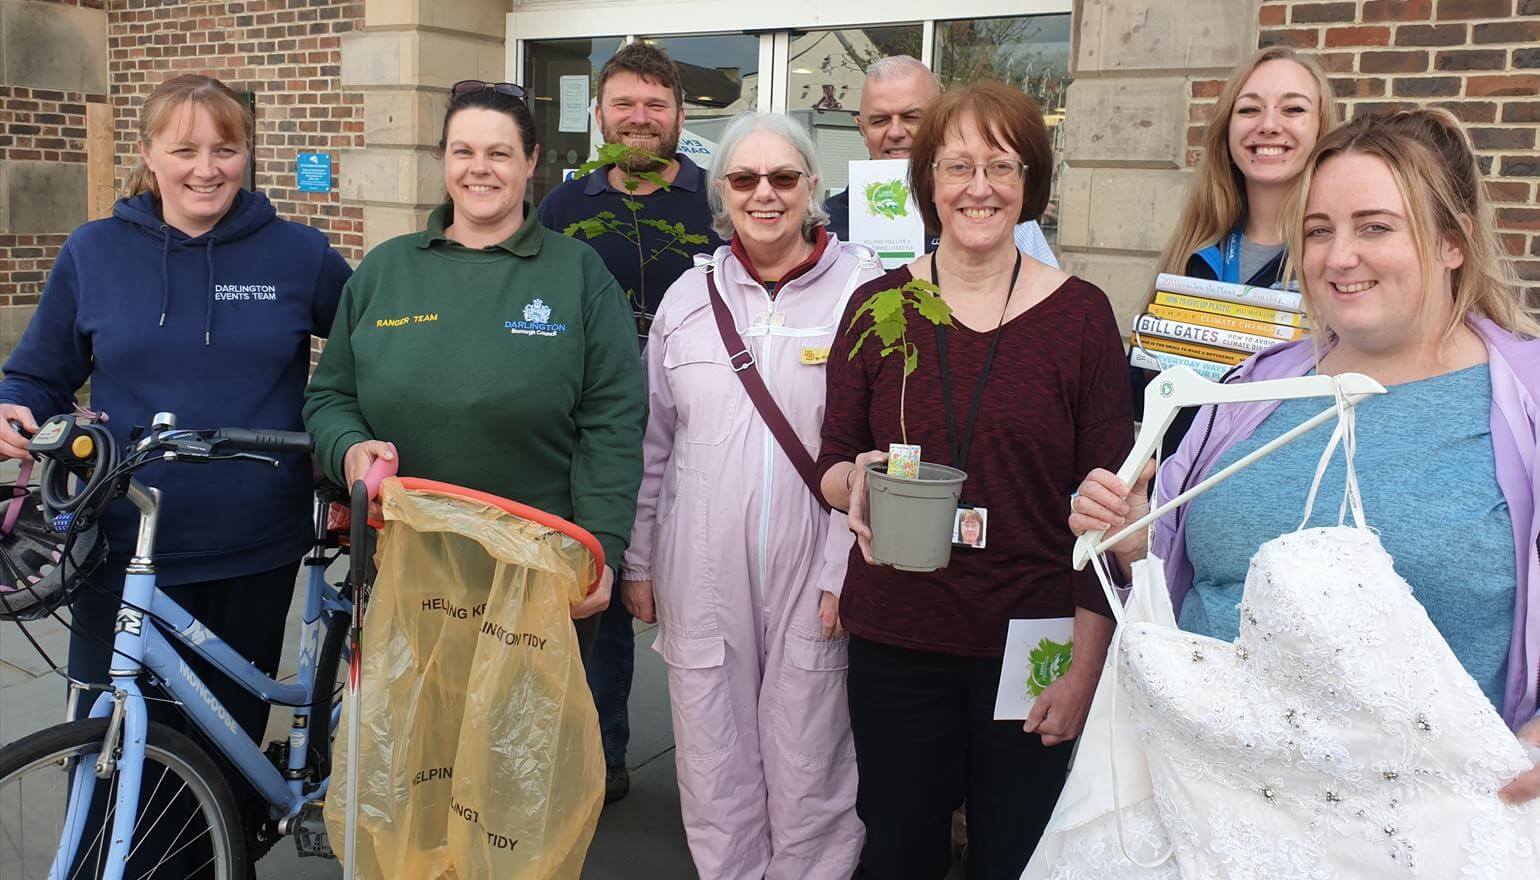 Get set for new Darlington Sustainability event